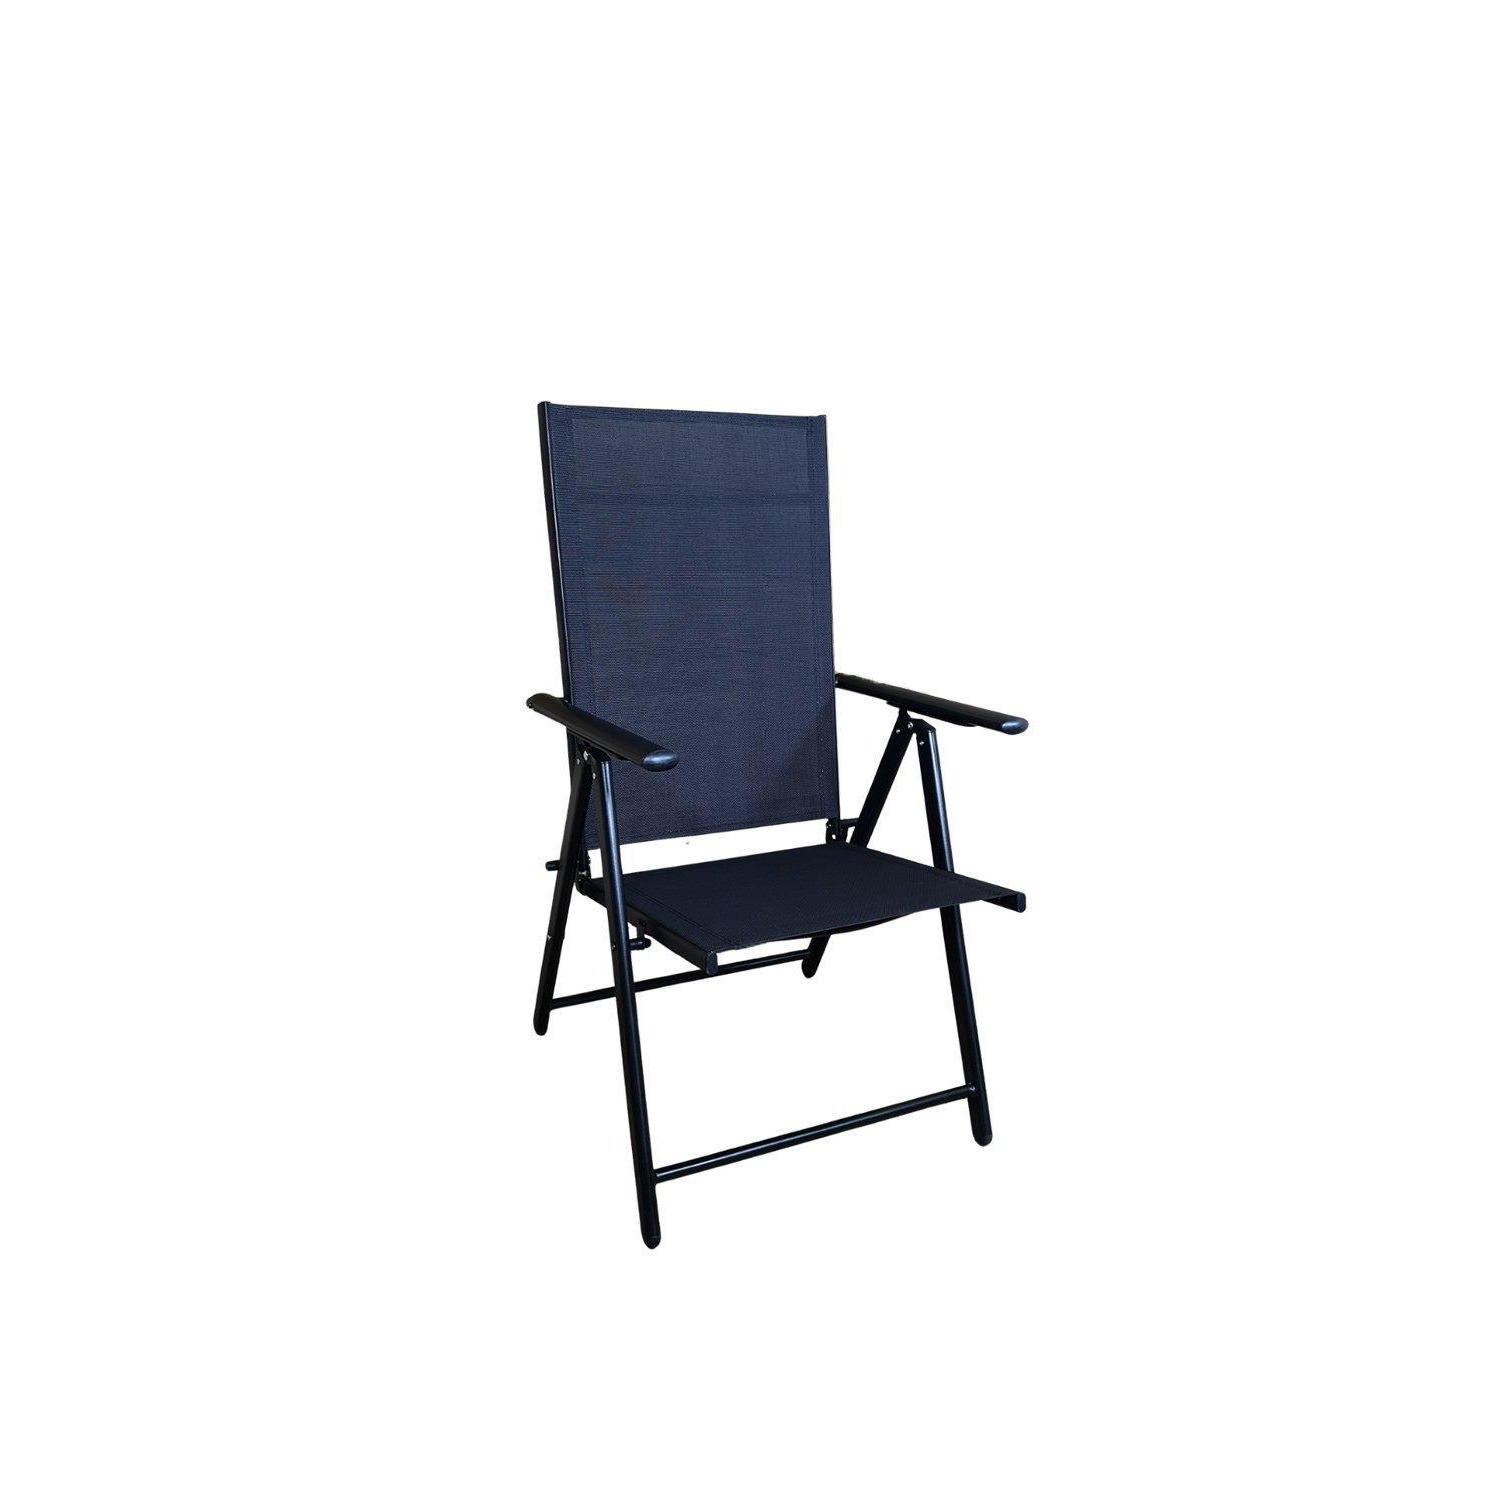 Multi Position High Back Reclining Garden / Outdoor Folding Chair in Black - image 1